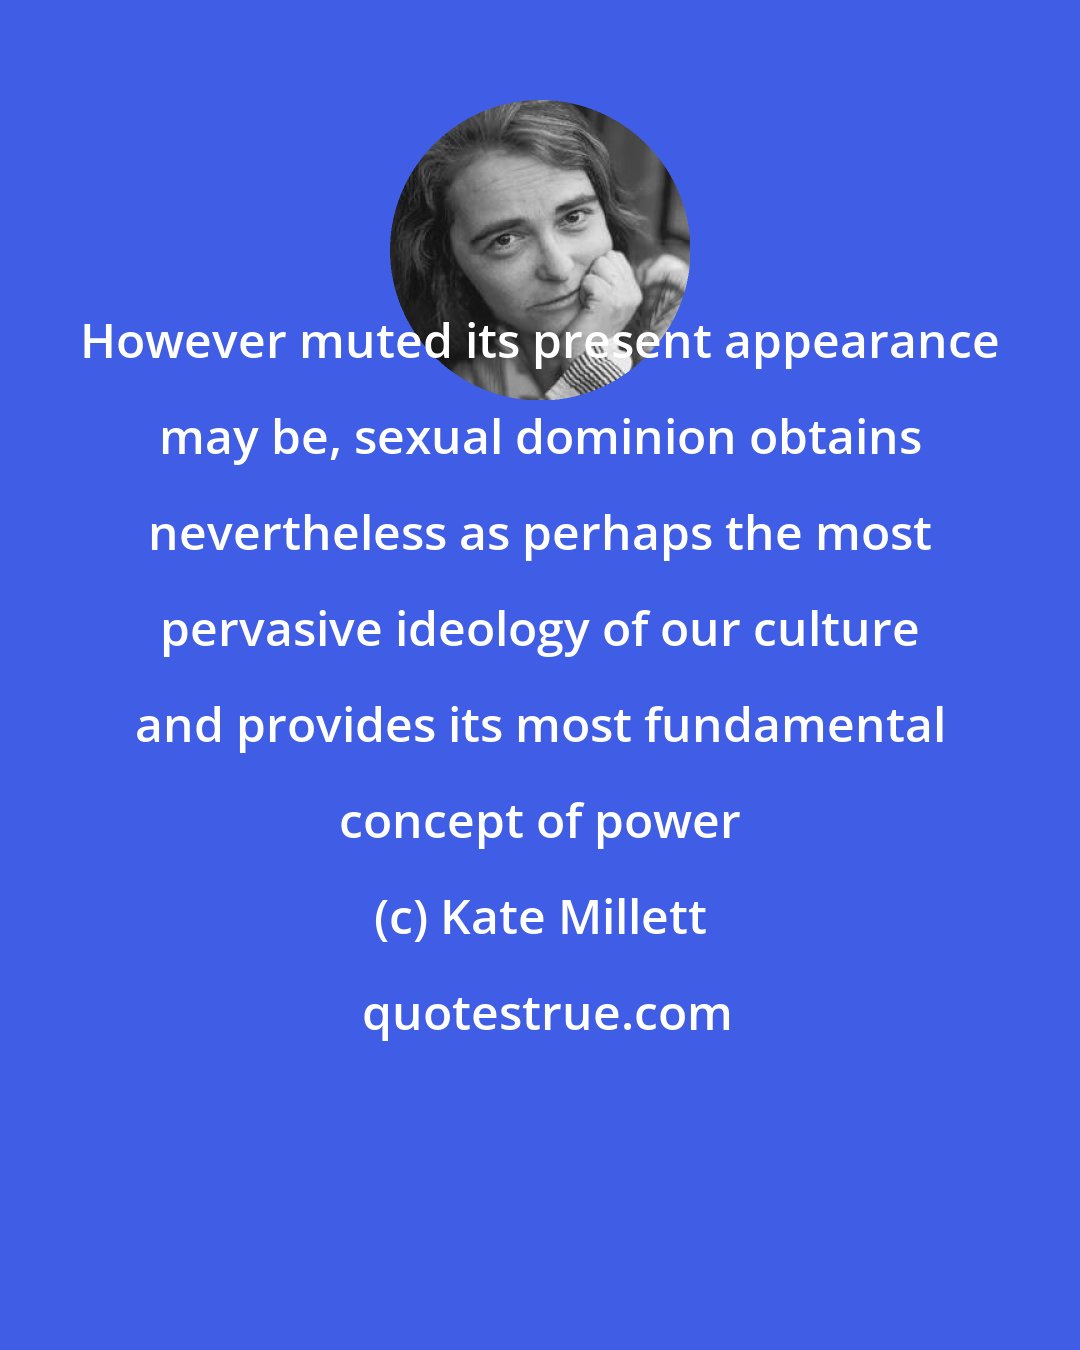 Kate Millett: However muted its present appearance may be, sexual dominion obtains nevertheless as perhaps the most pervasive ideology of our culture and provides its most fundamental concept of power